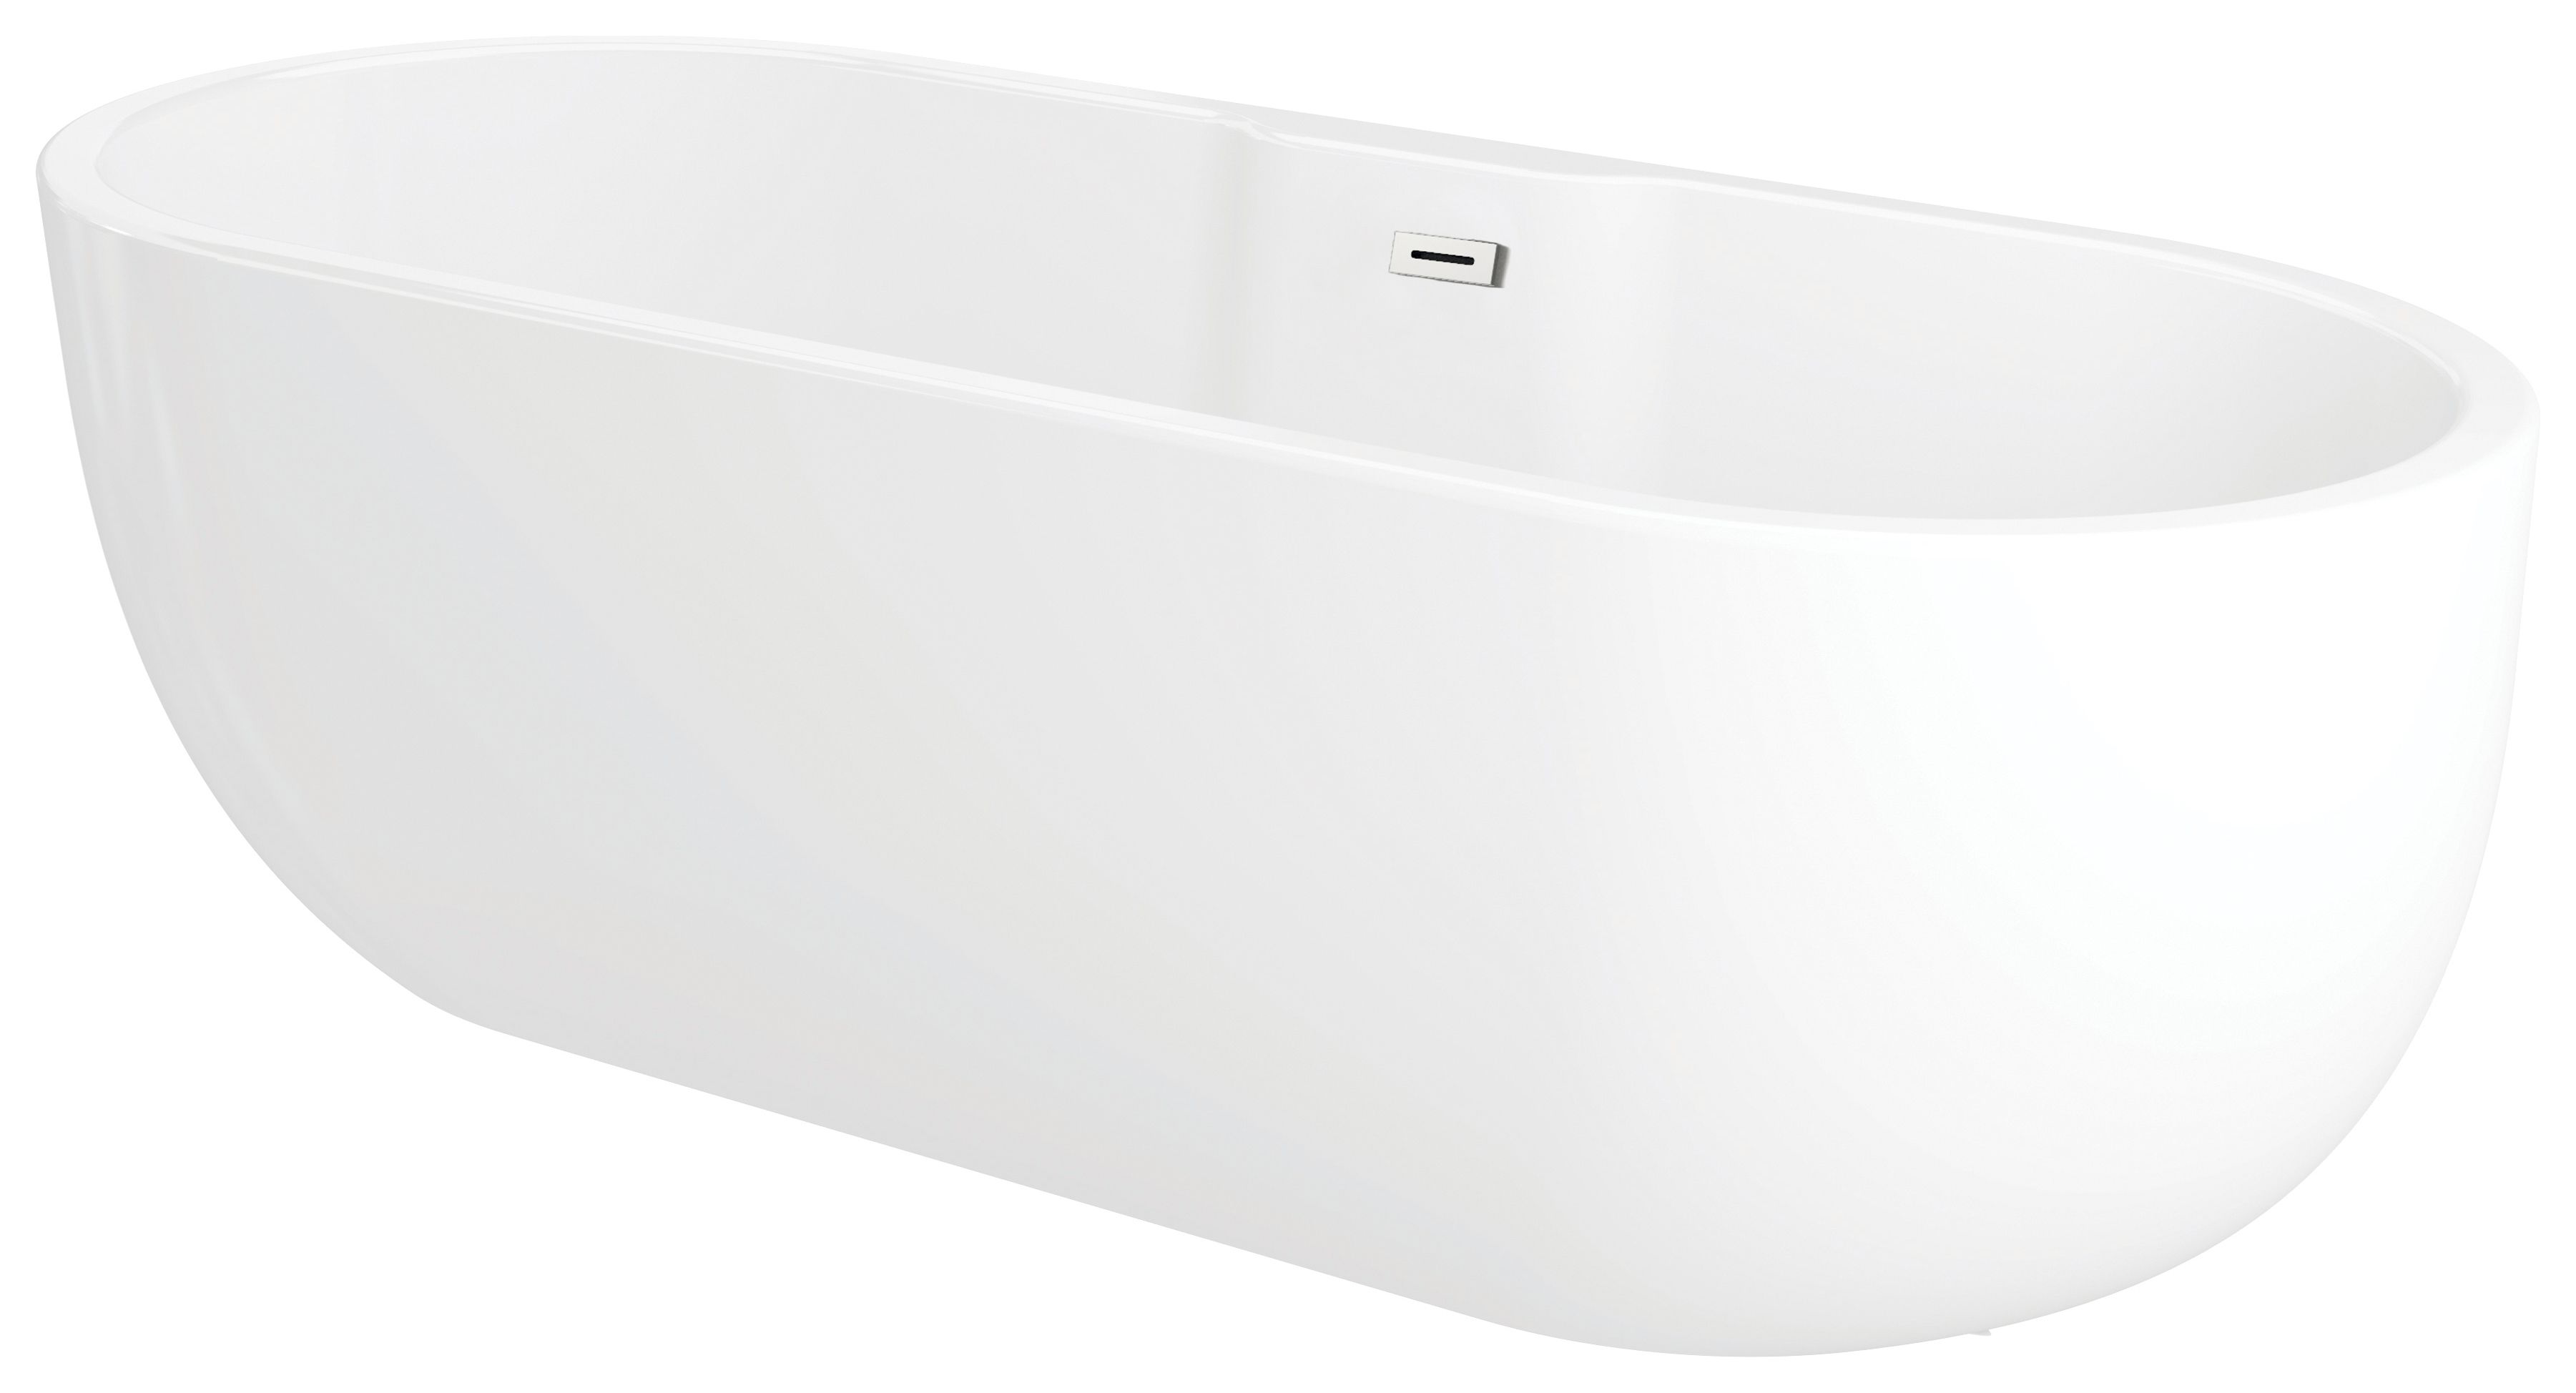 Image of Wickes Oval Freestanding Contemporary Bath - 1655 x 750mm